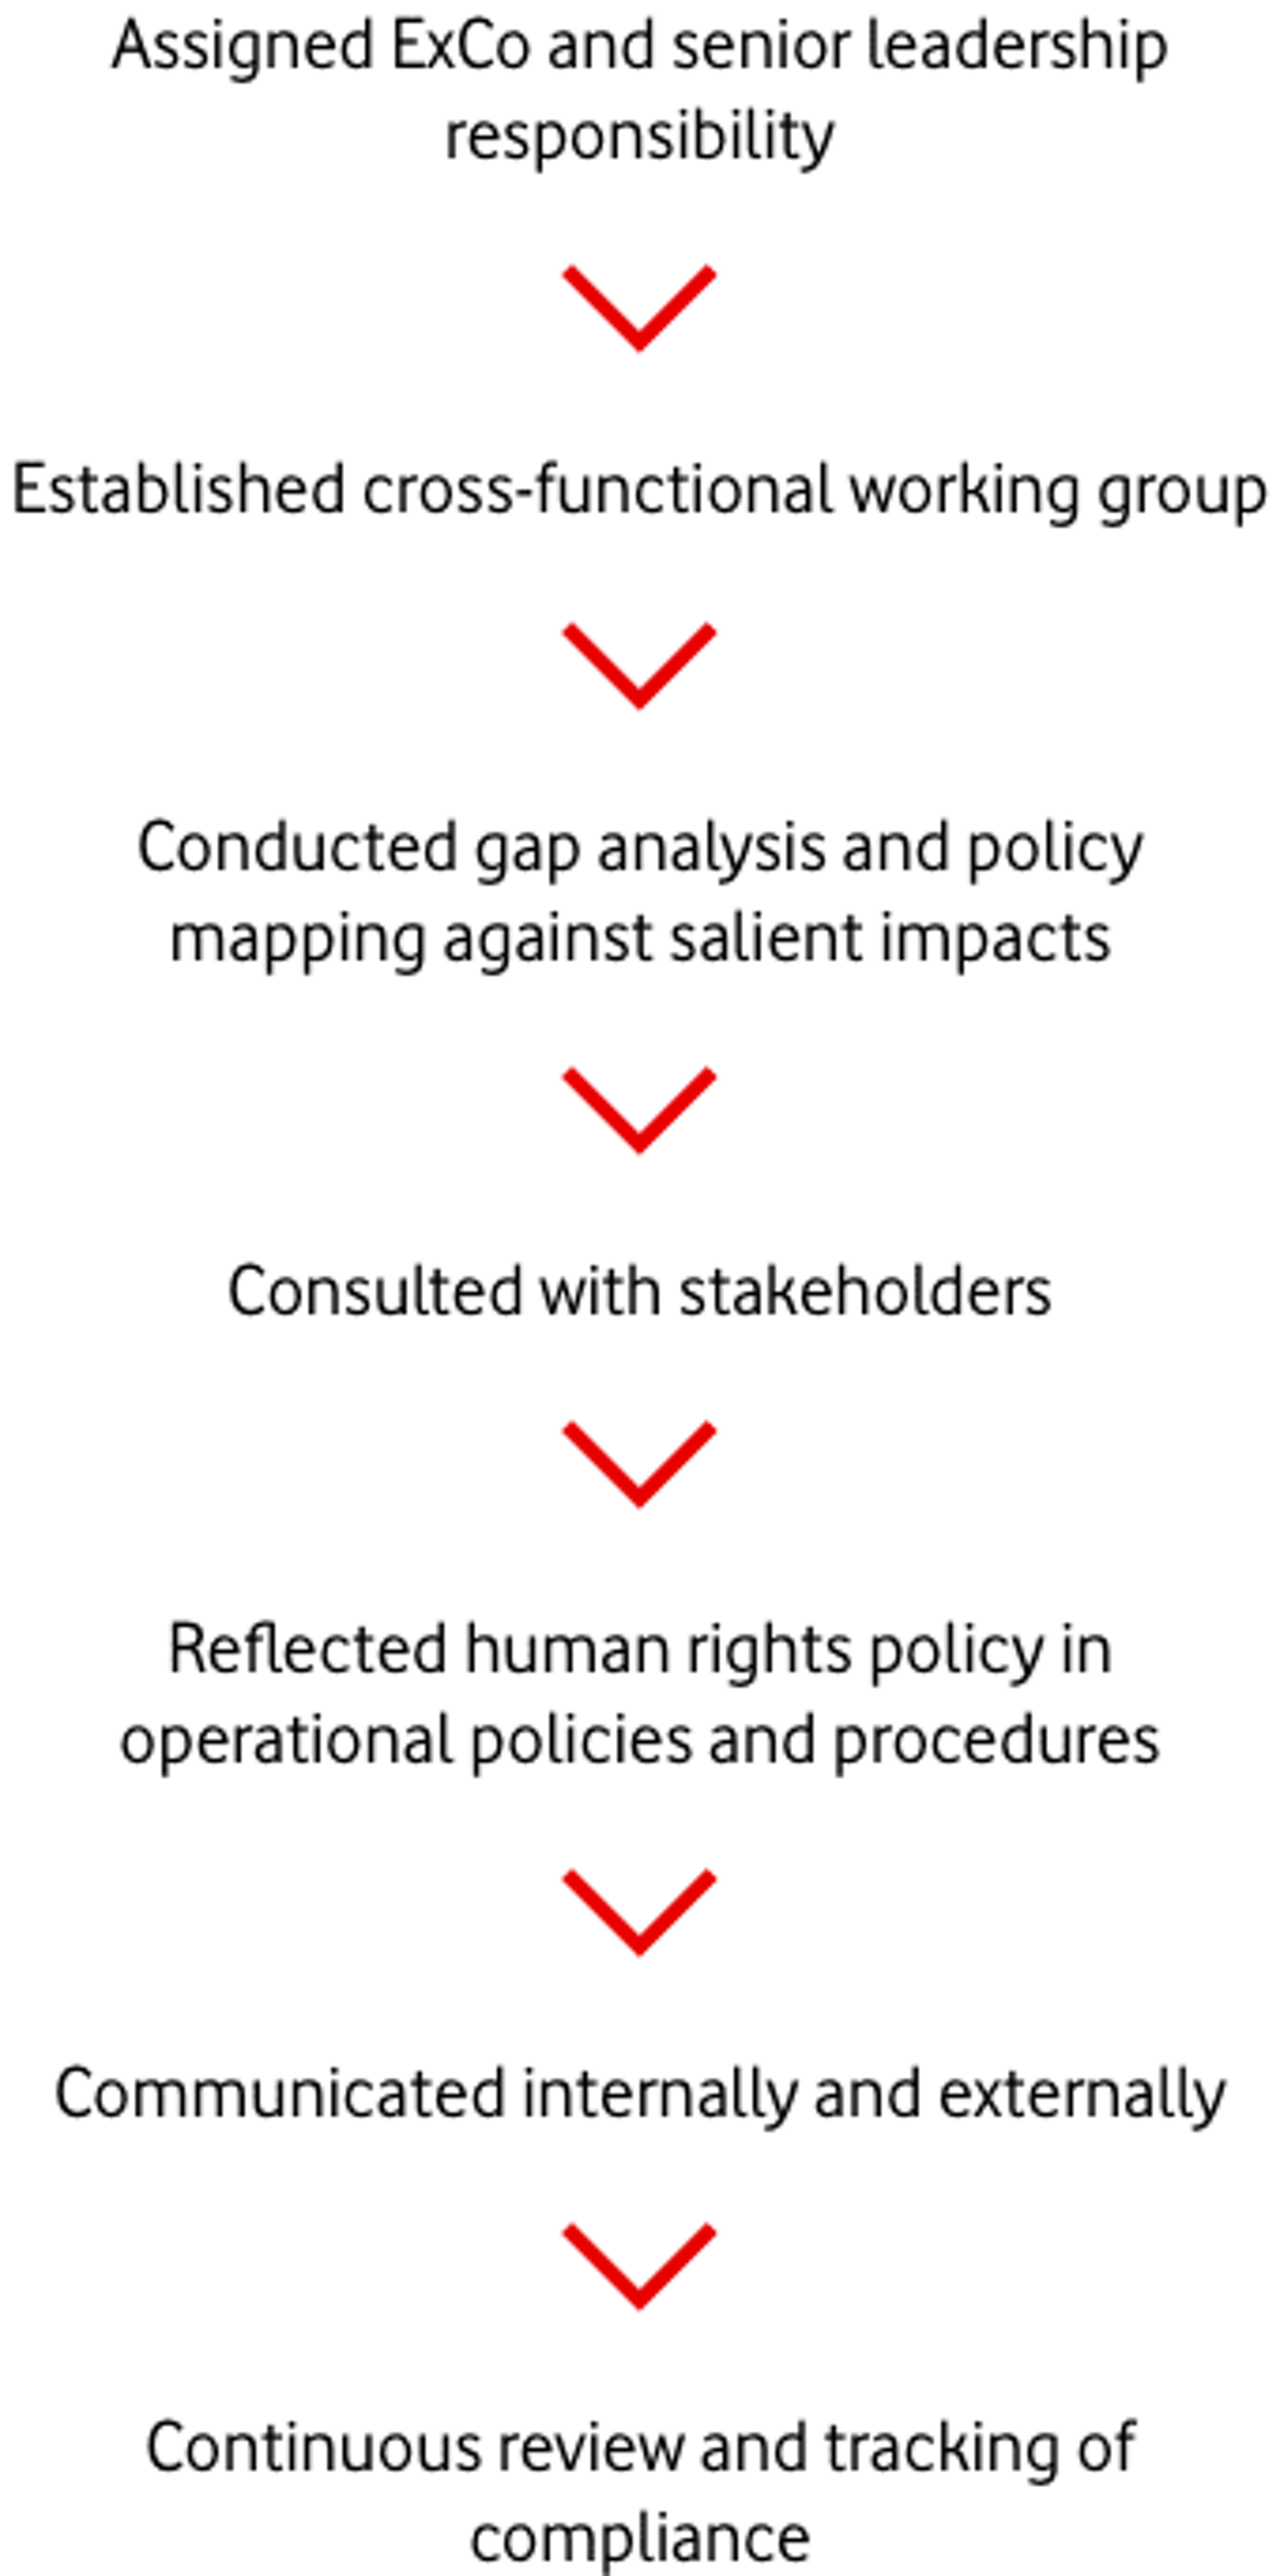 Developing our Human Rights Policy diagram